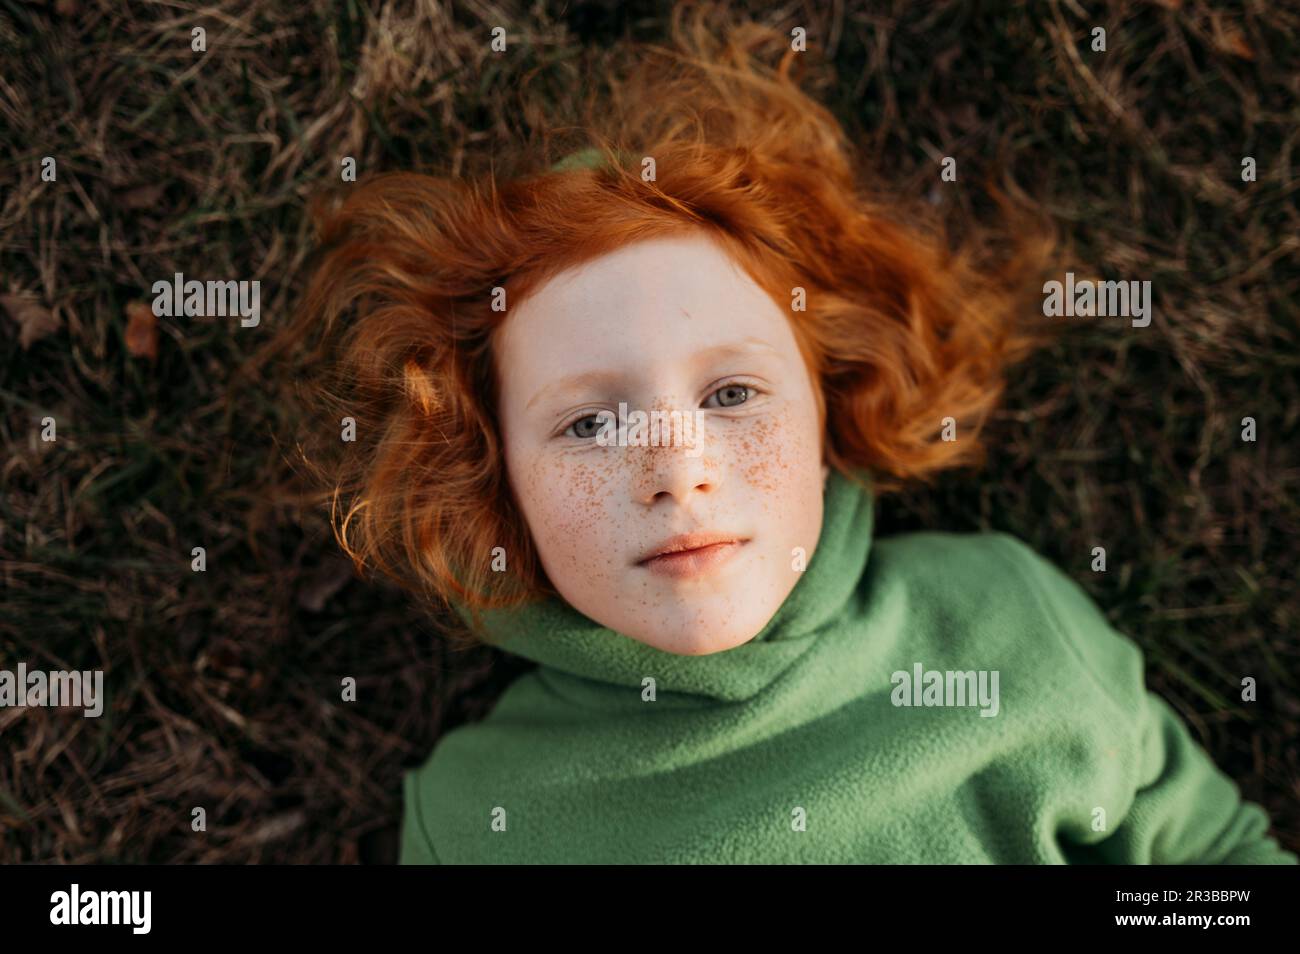 Redhead girl with freckles lying in field Stock Photo